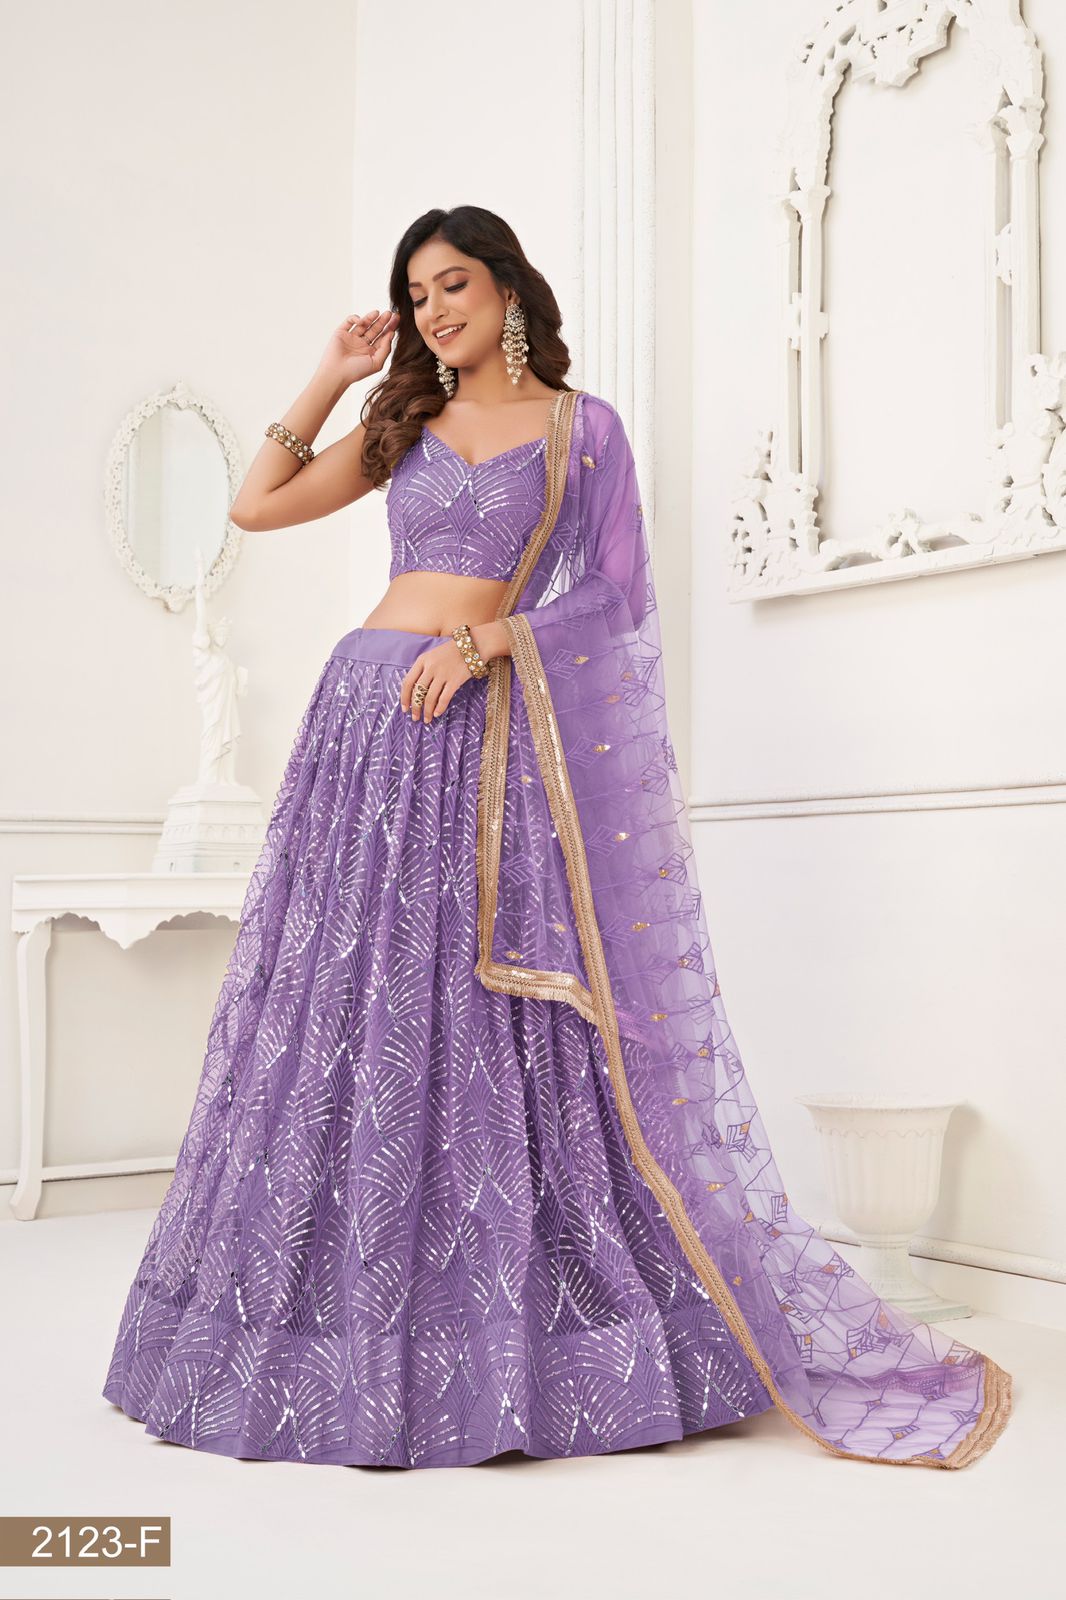 Launch a new butterfly net with the Cancan lehenga choli collection for online sale